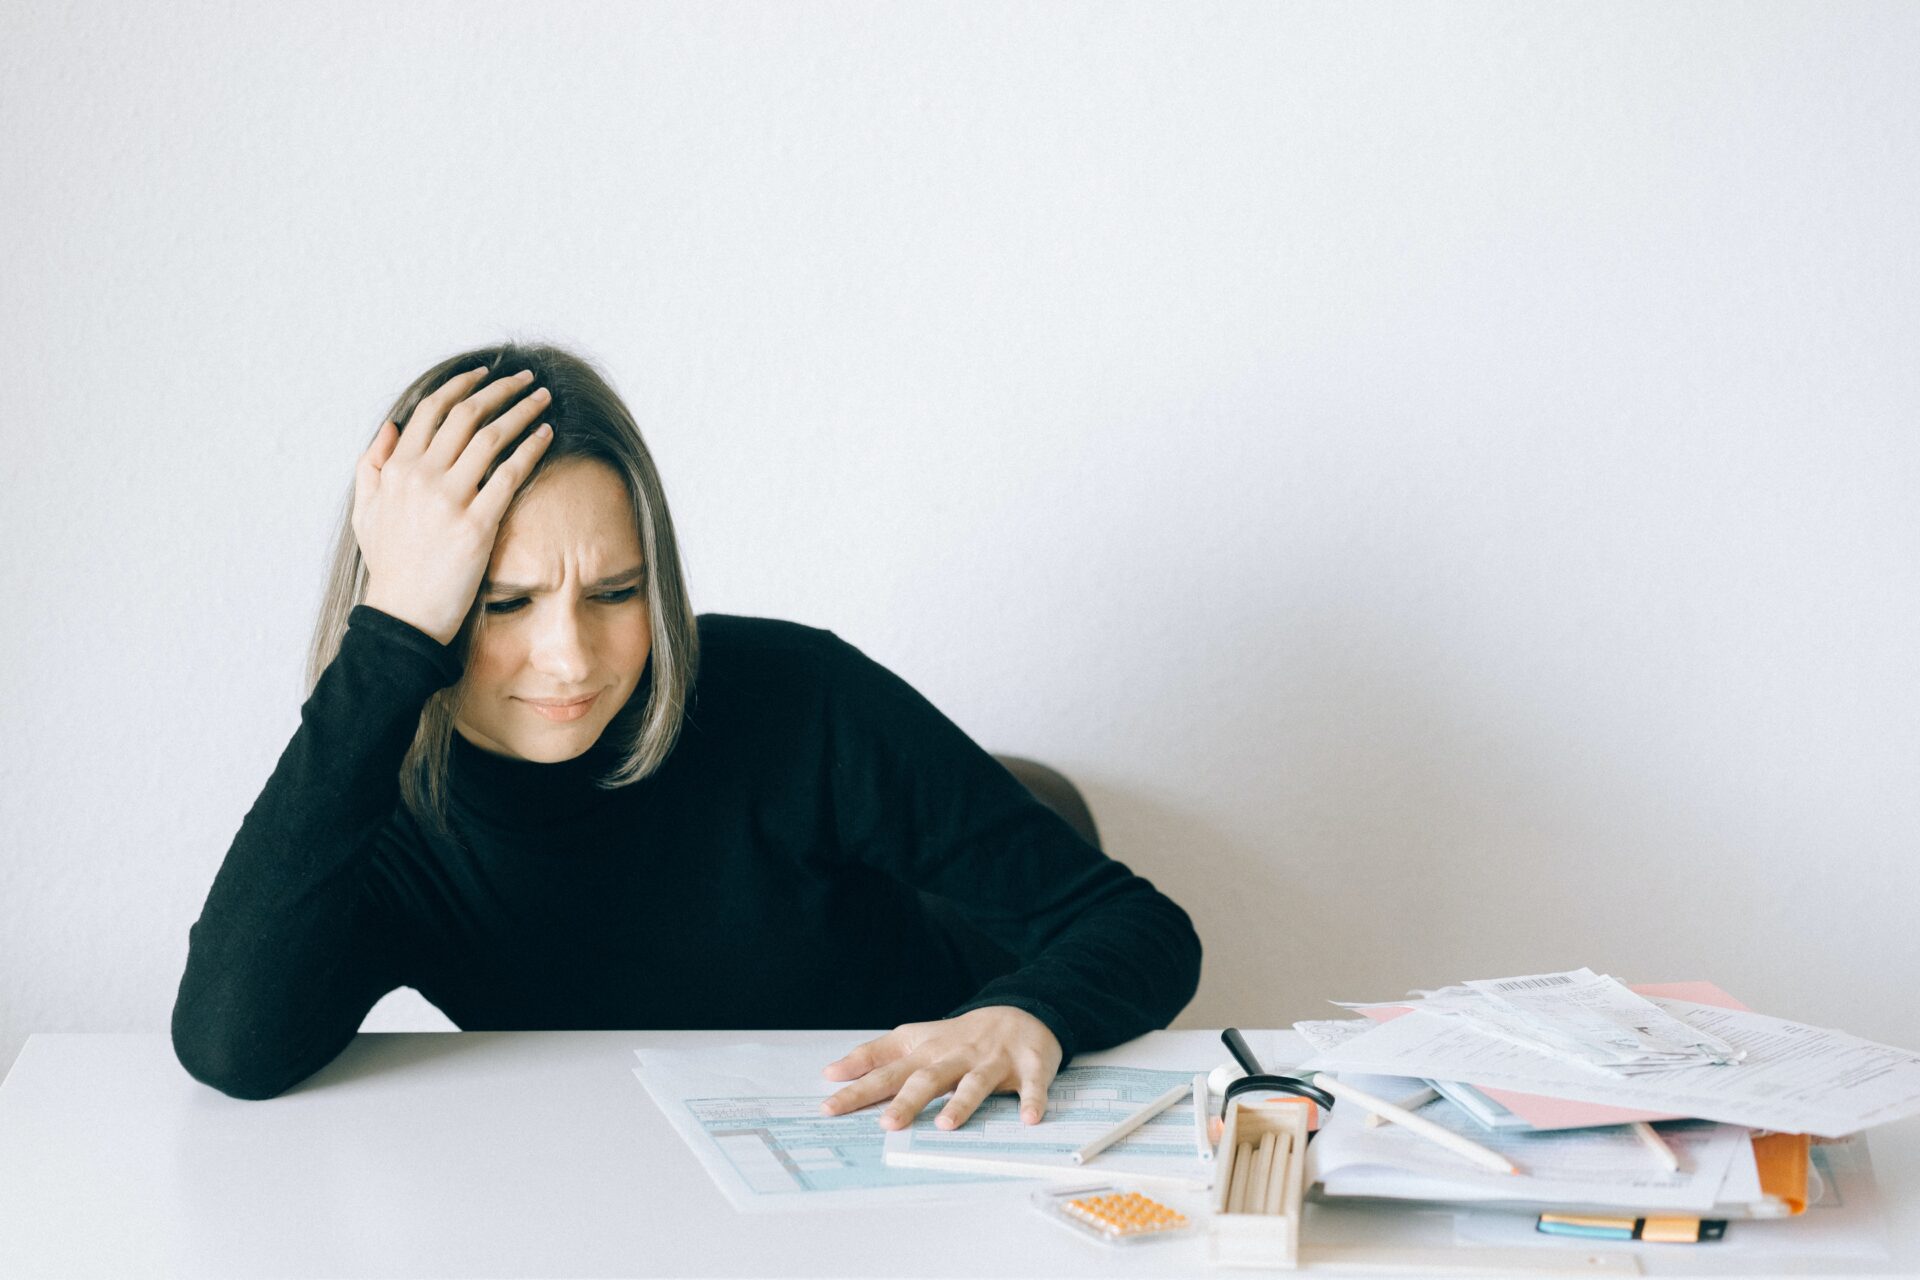 Woman with hand on head near pile of paper on desk (Photo by Nataliya Vaitkevich from Pexels)